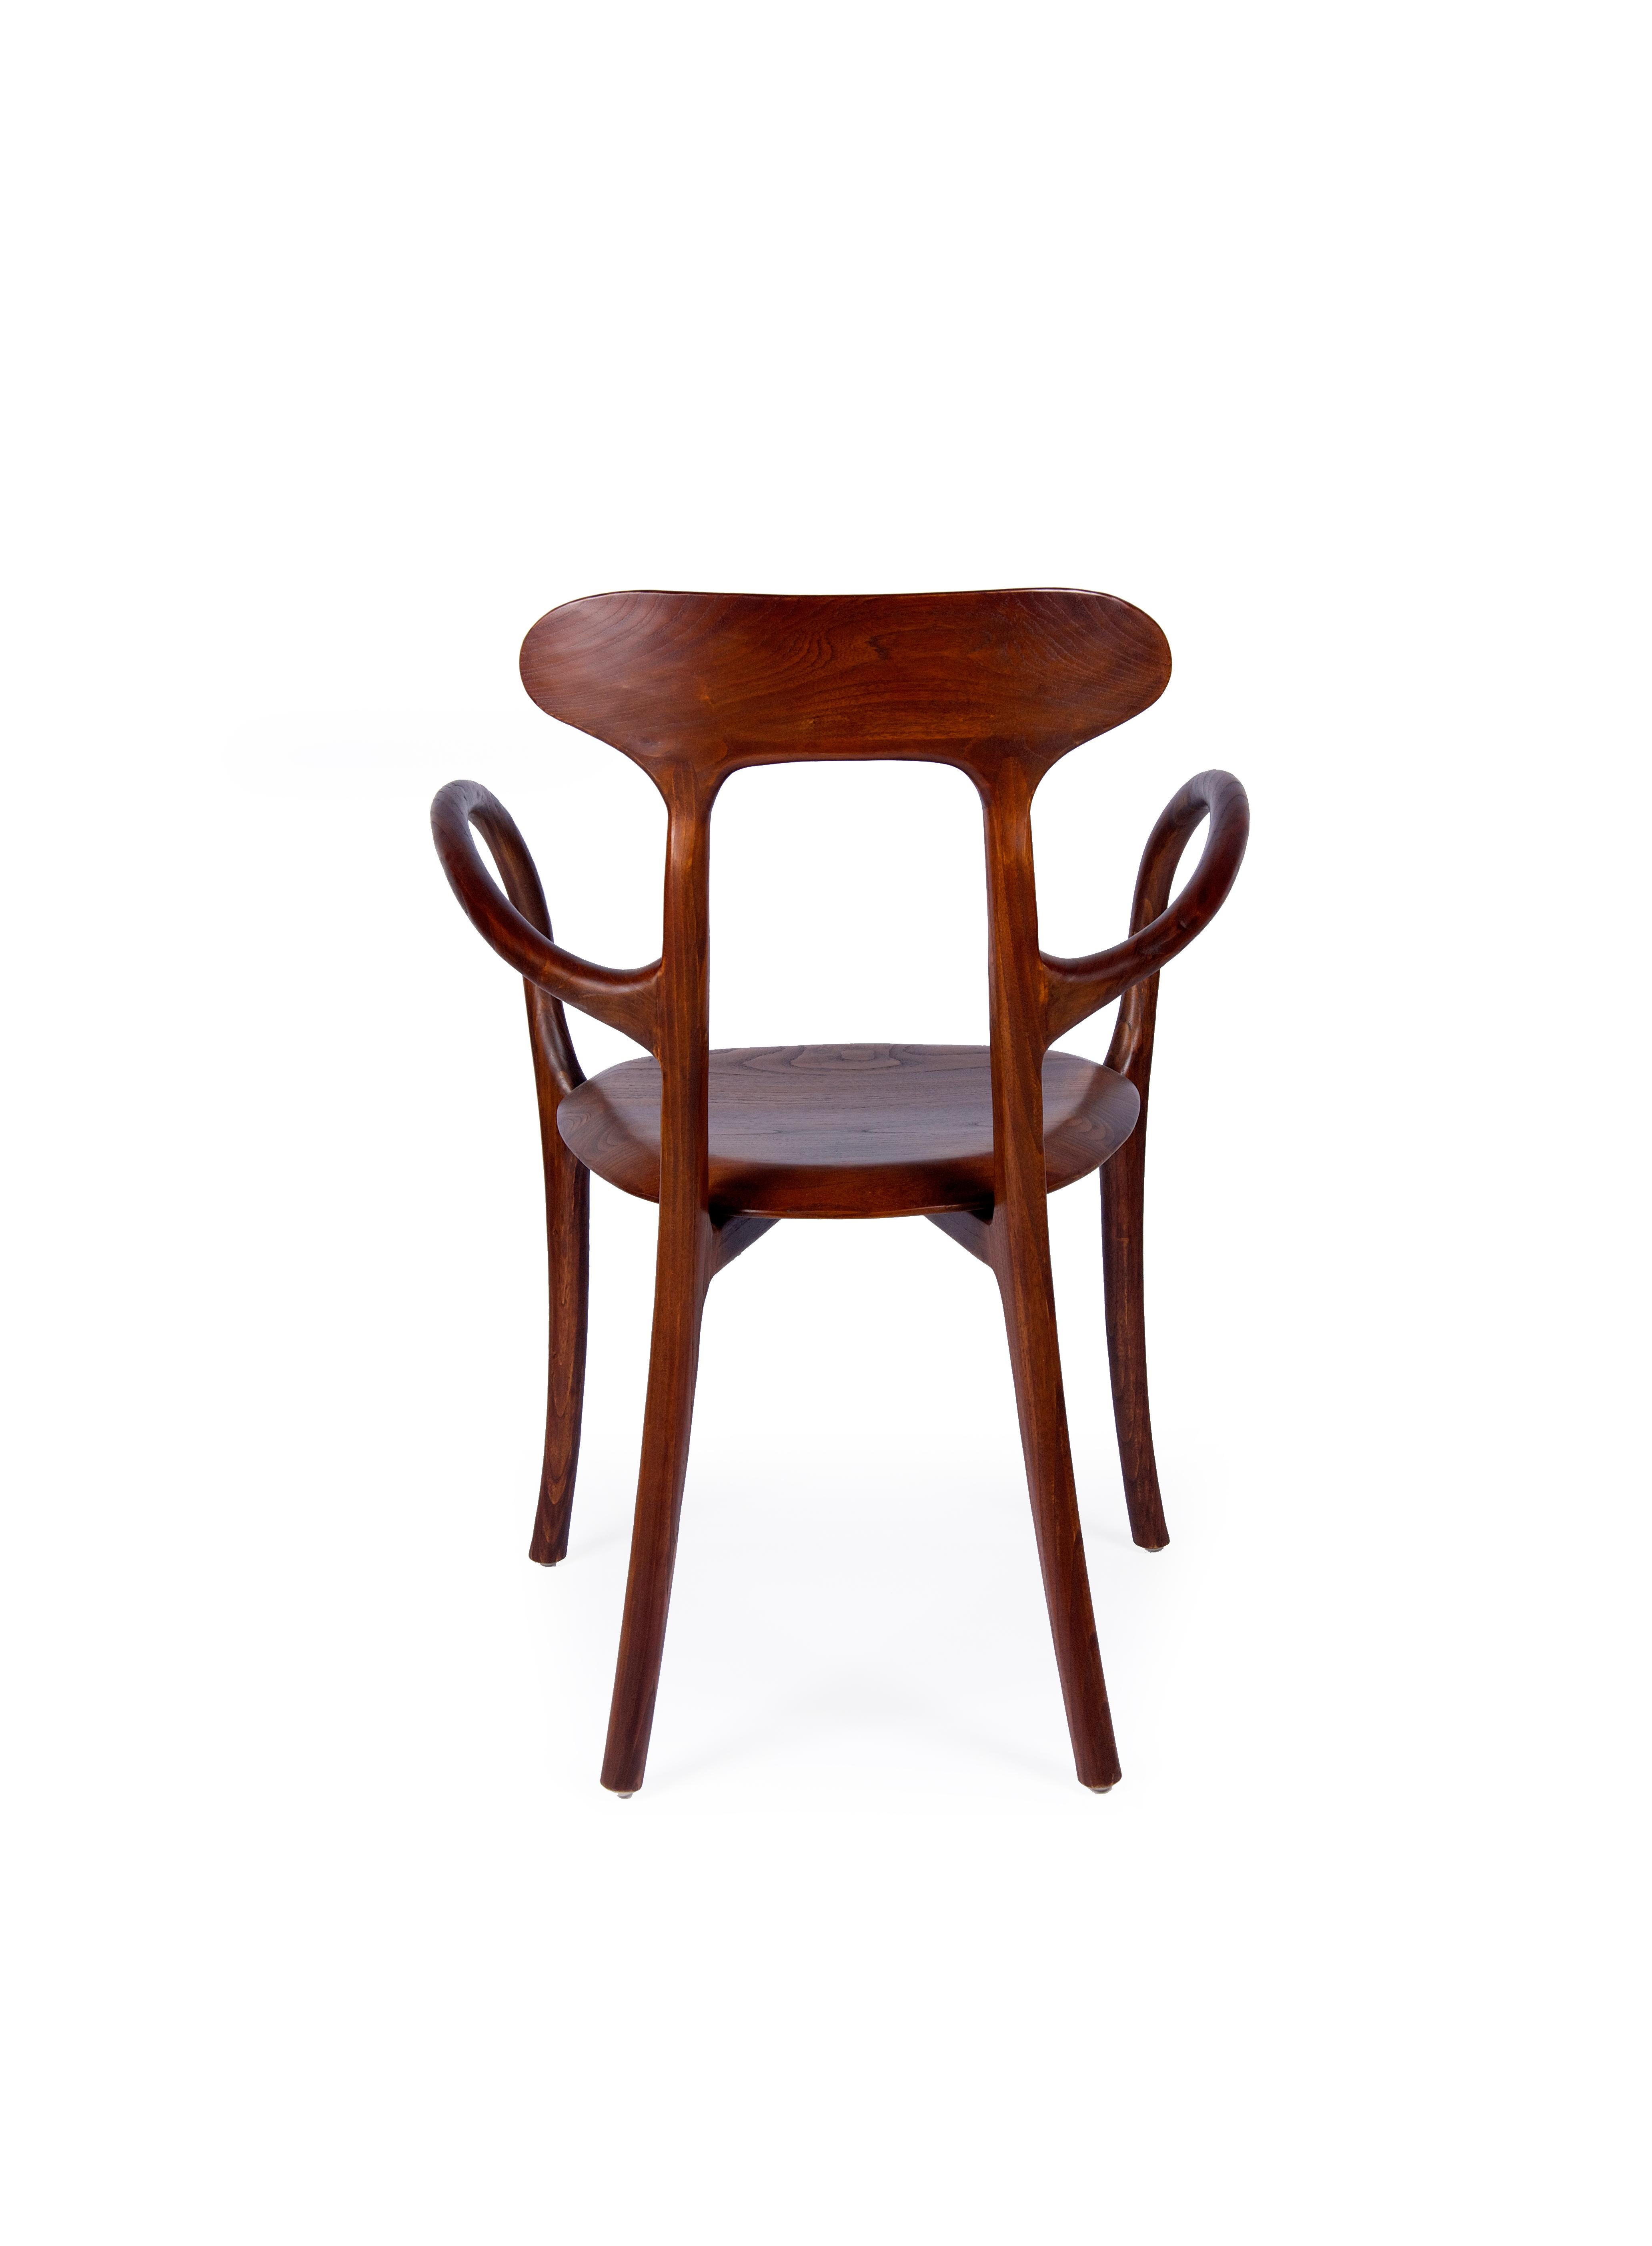 Spanish New Bentwood Armchair with Wood Seat and Back